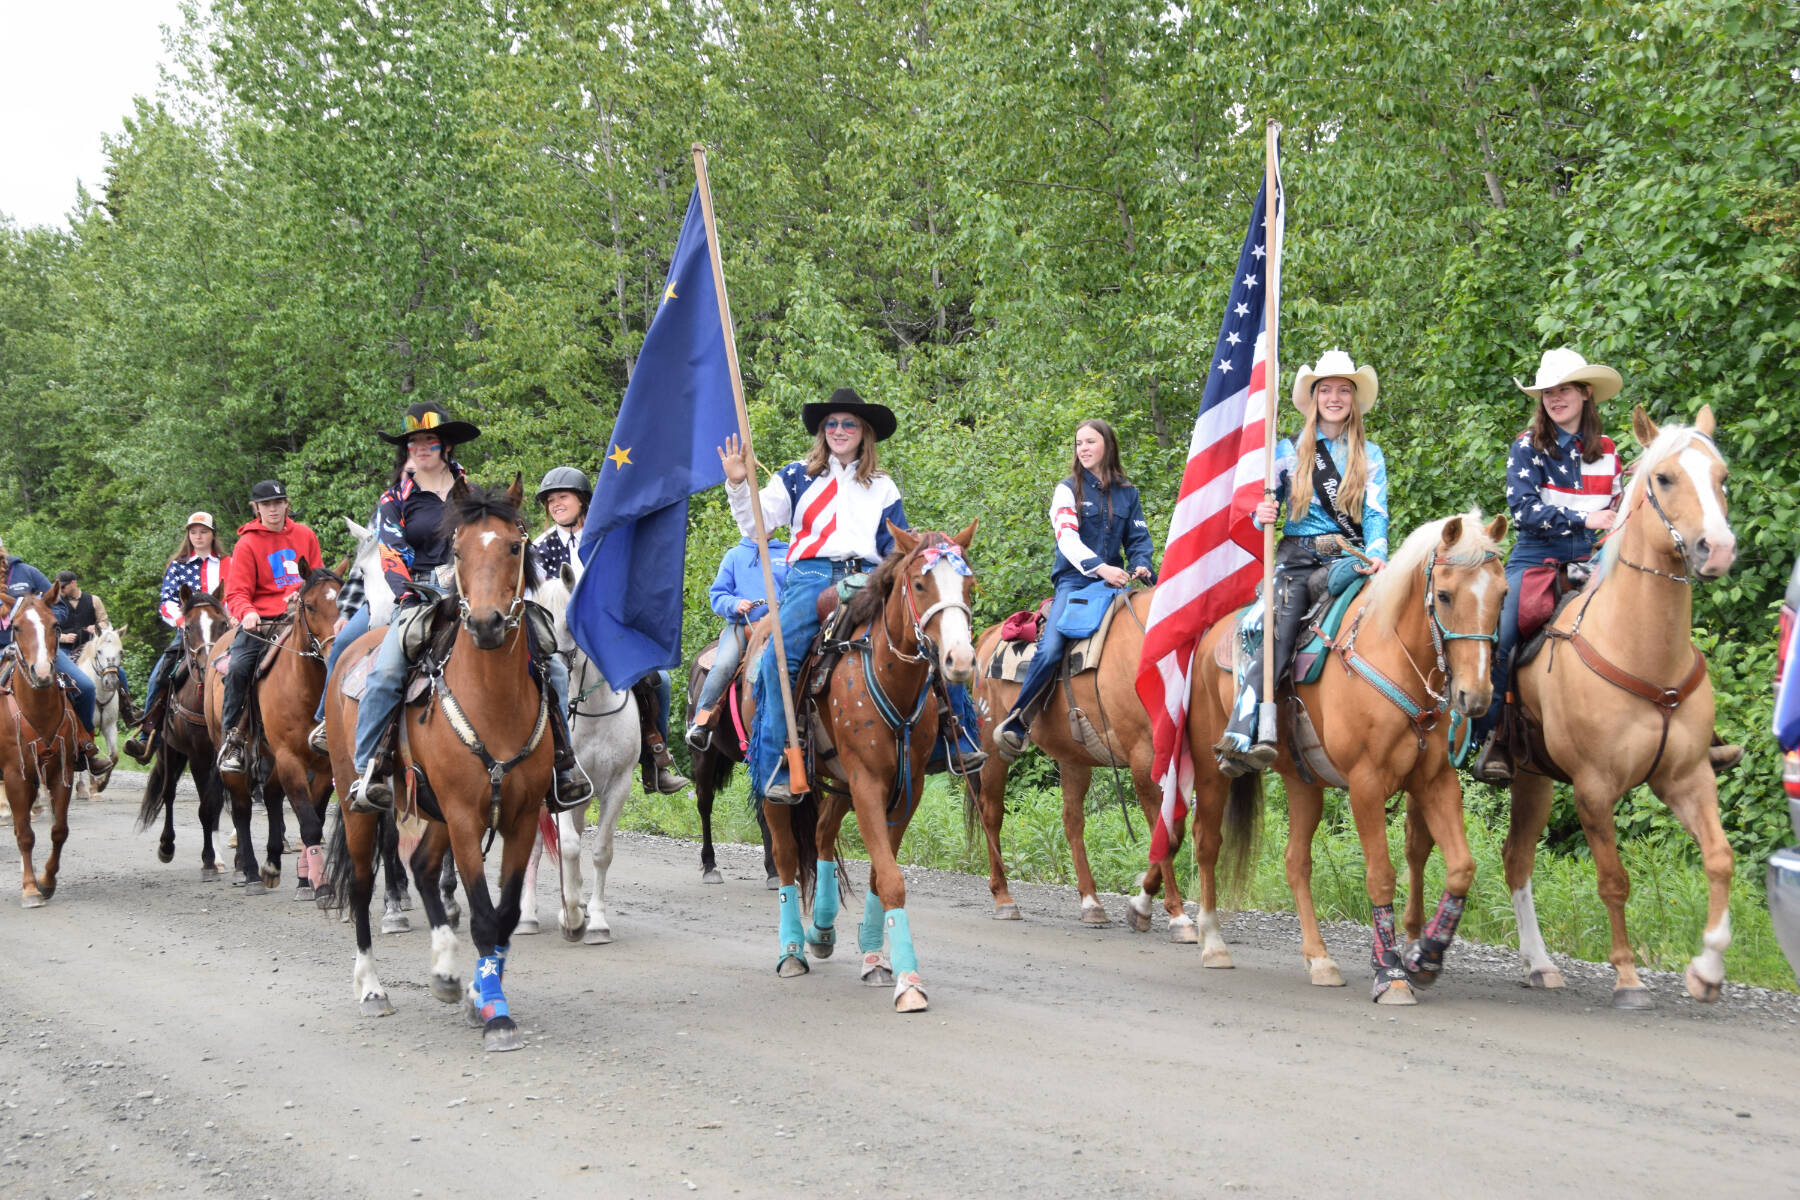 Community members ride down School Street on their horses during the Anchor Point Fourth of July parade on Tuesday, July 4, 2023 in Anchor Point, Alaska. (Delcenia Cosman/Homer News)